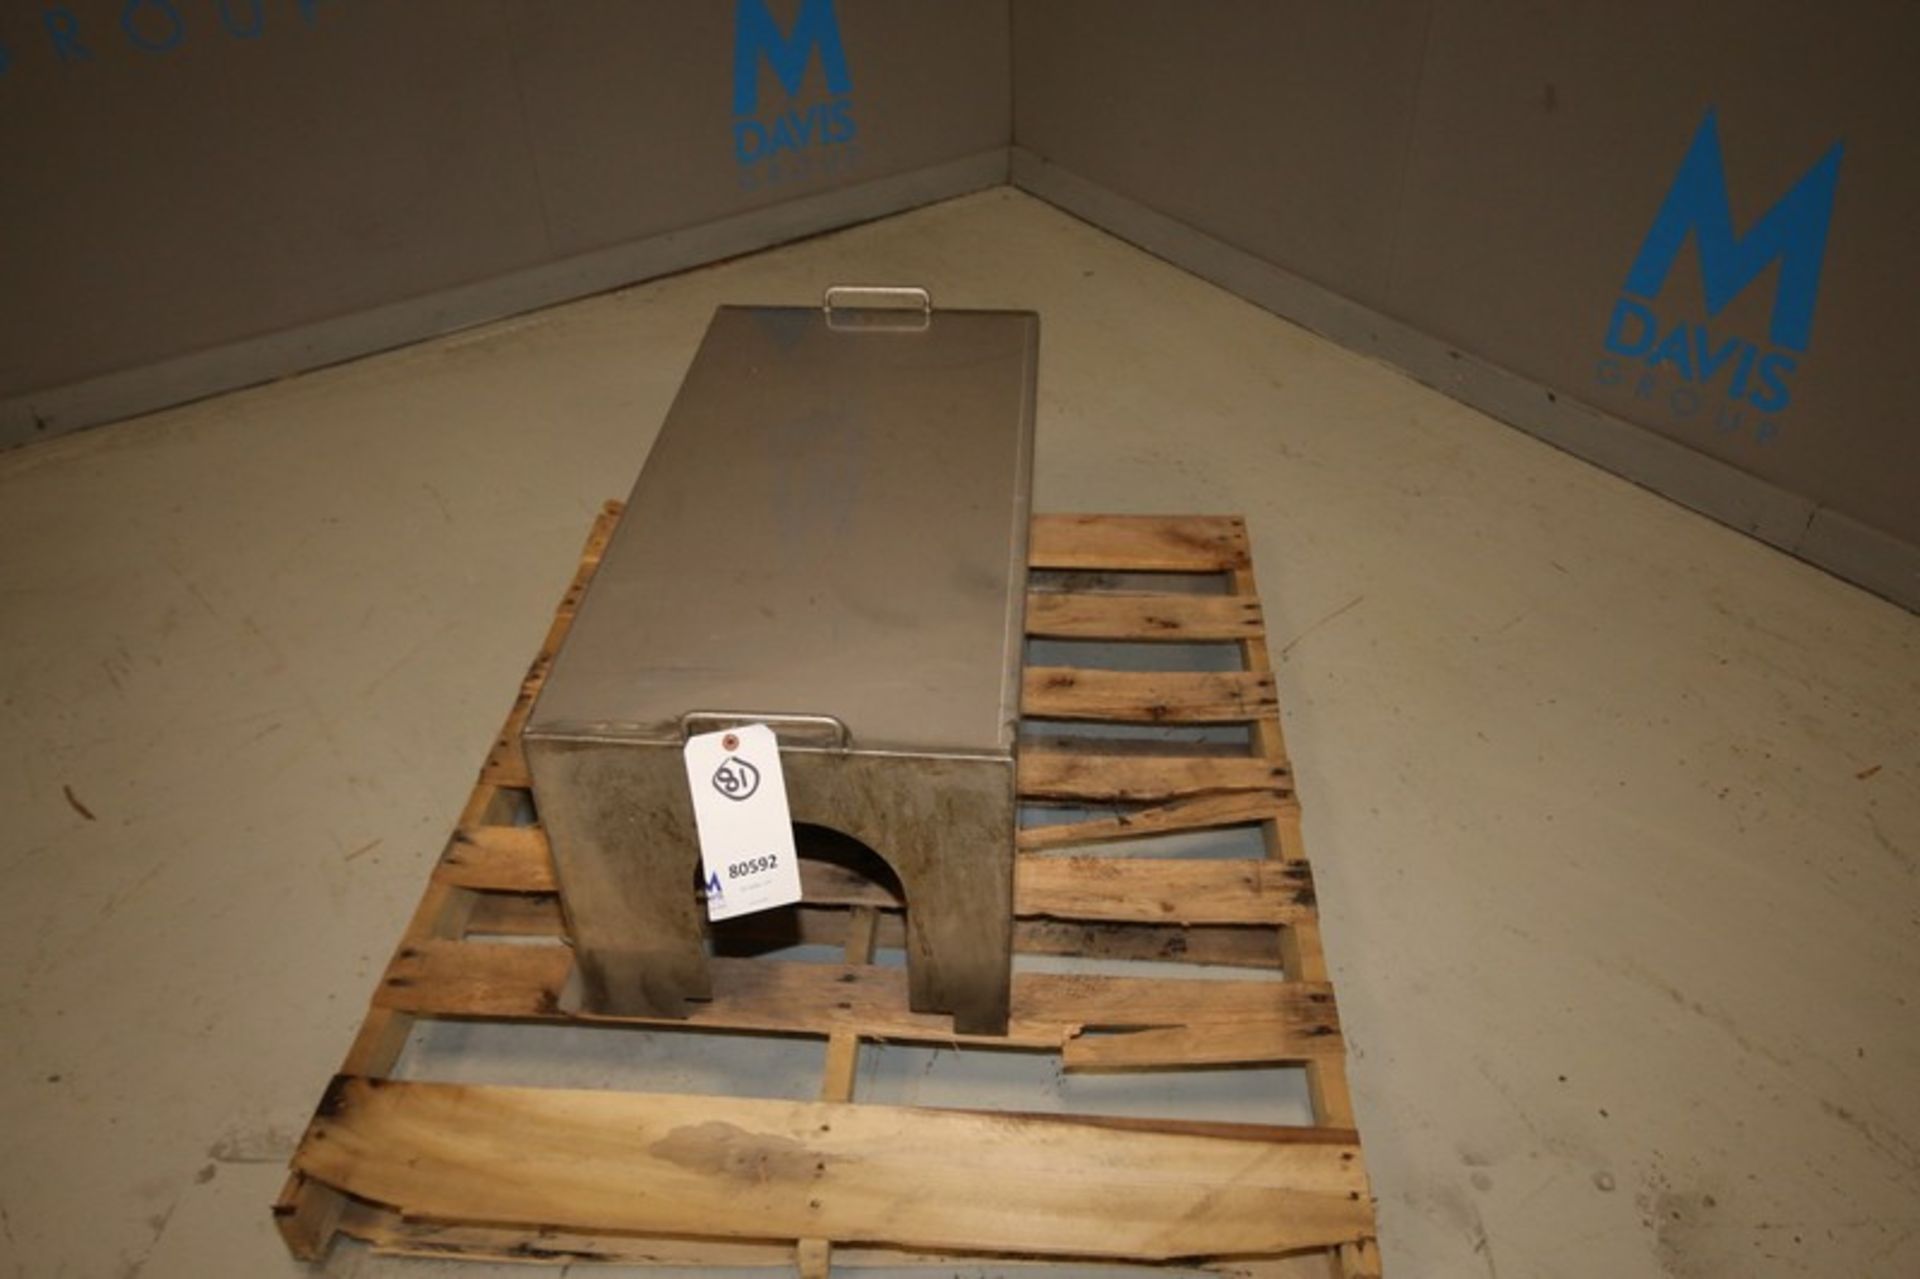 34" L x 17" W x 15" H S/S Pump / Motor Cover (INV#80592)(Located @ the MDG Auction Showroom in Pgh.,